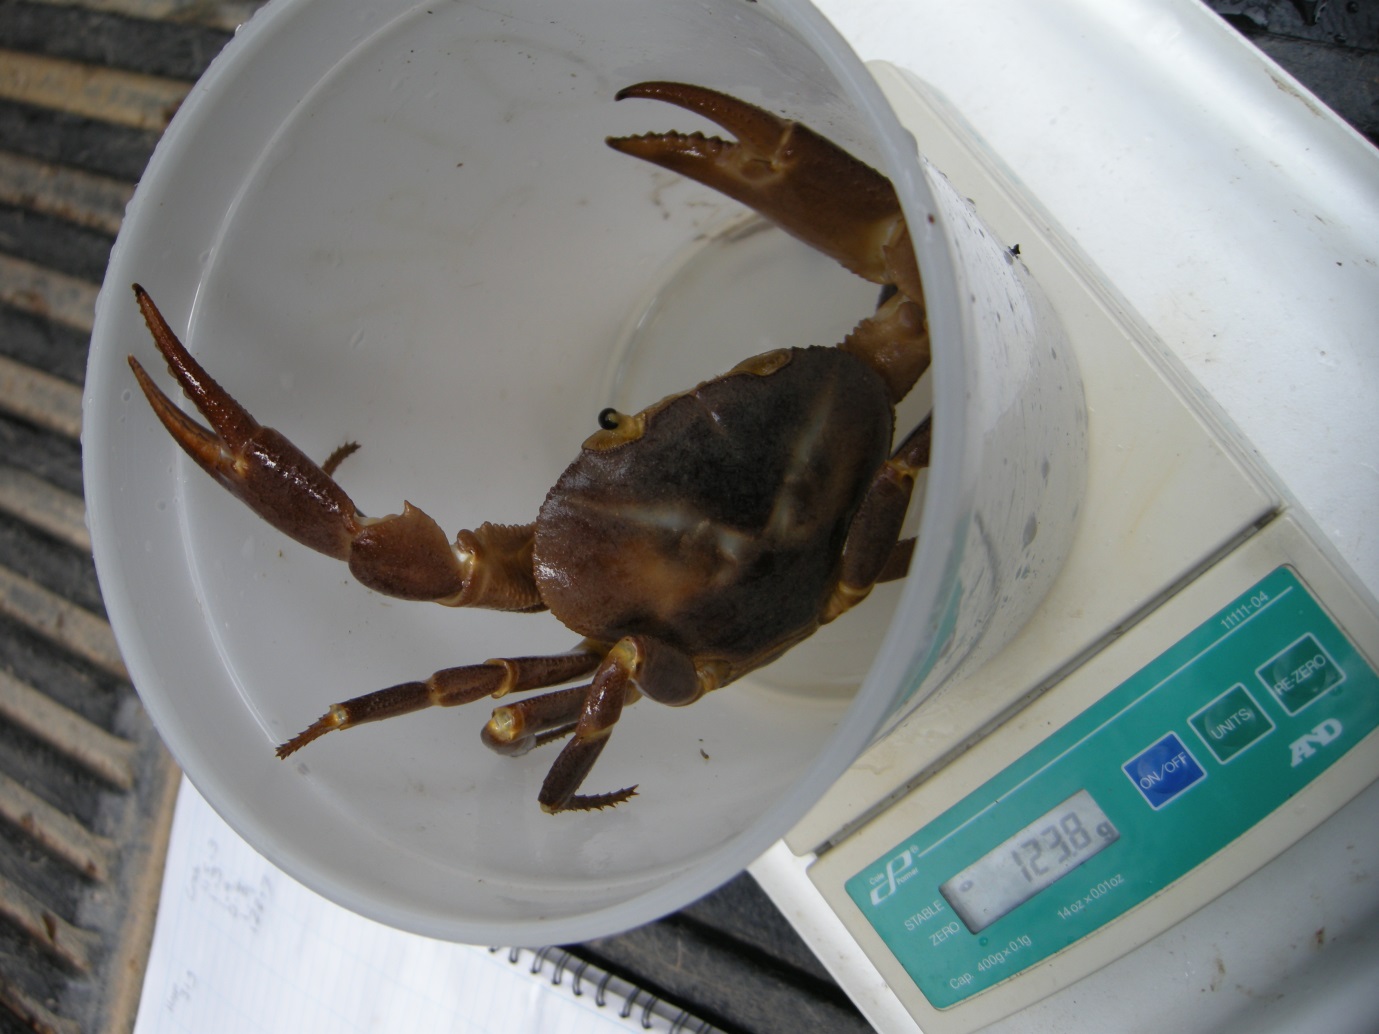 A large manicou crab being weighed during one of our surveys